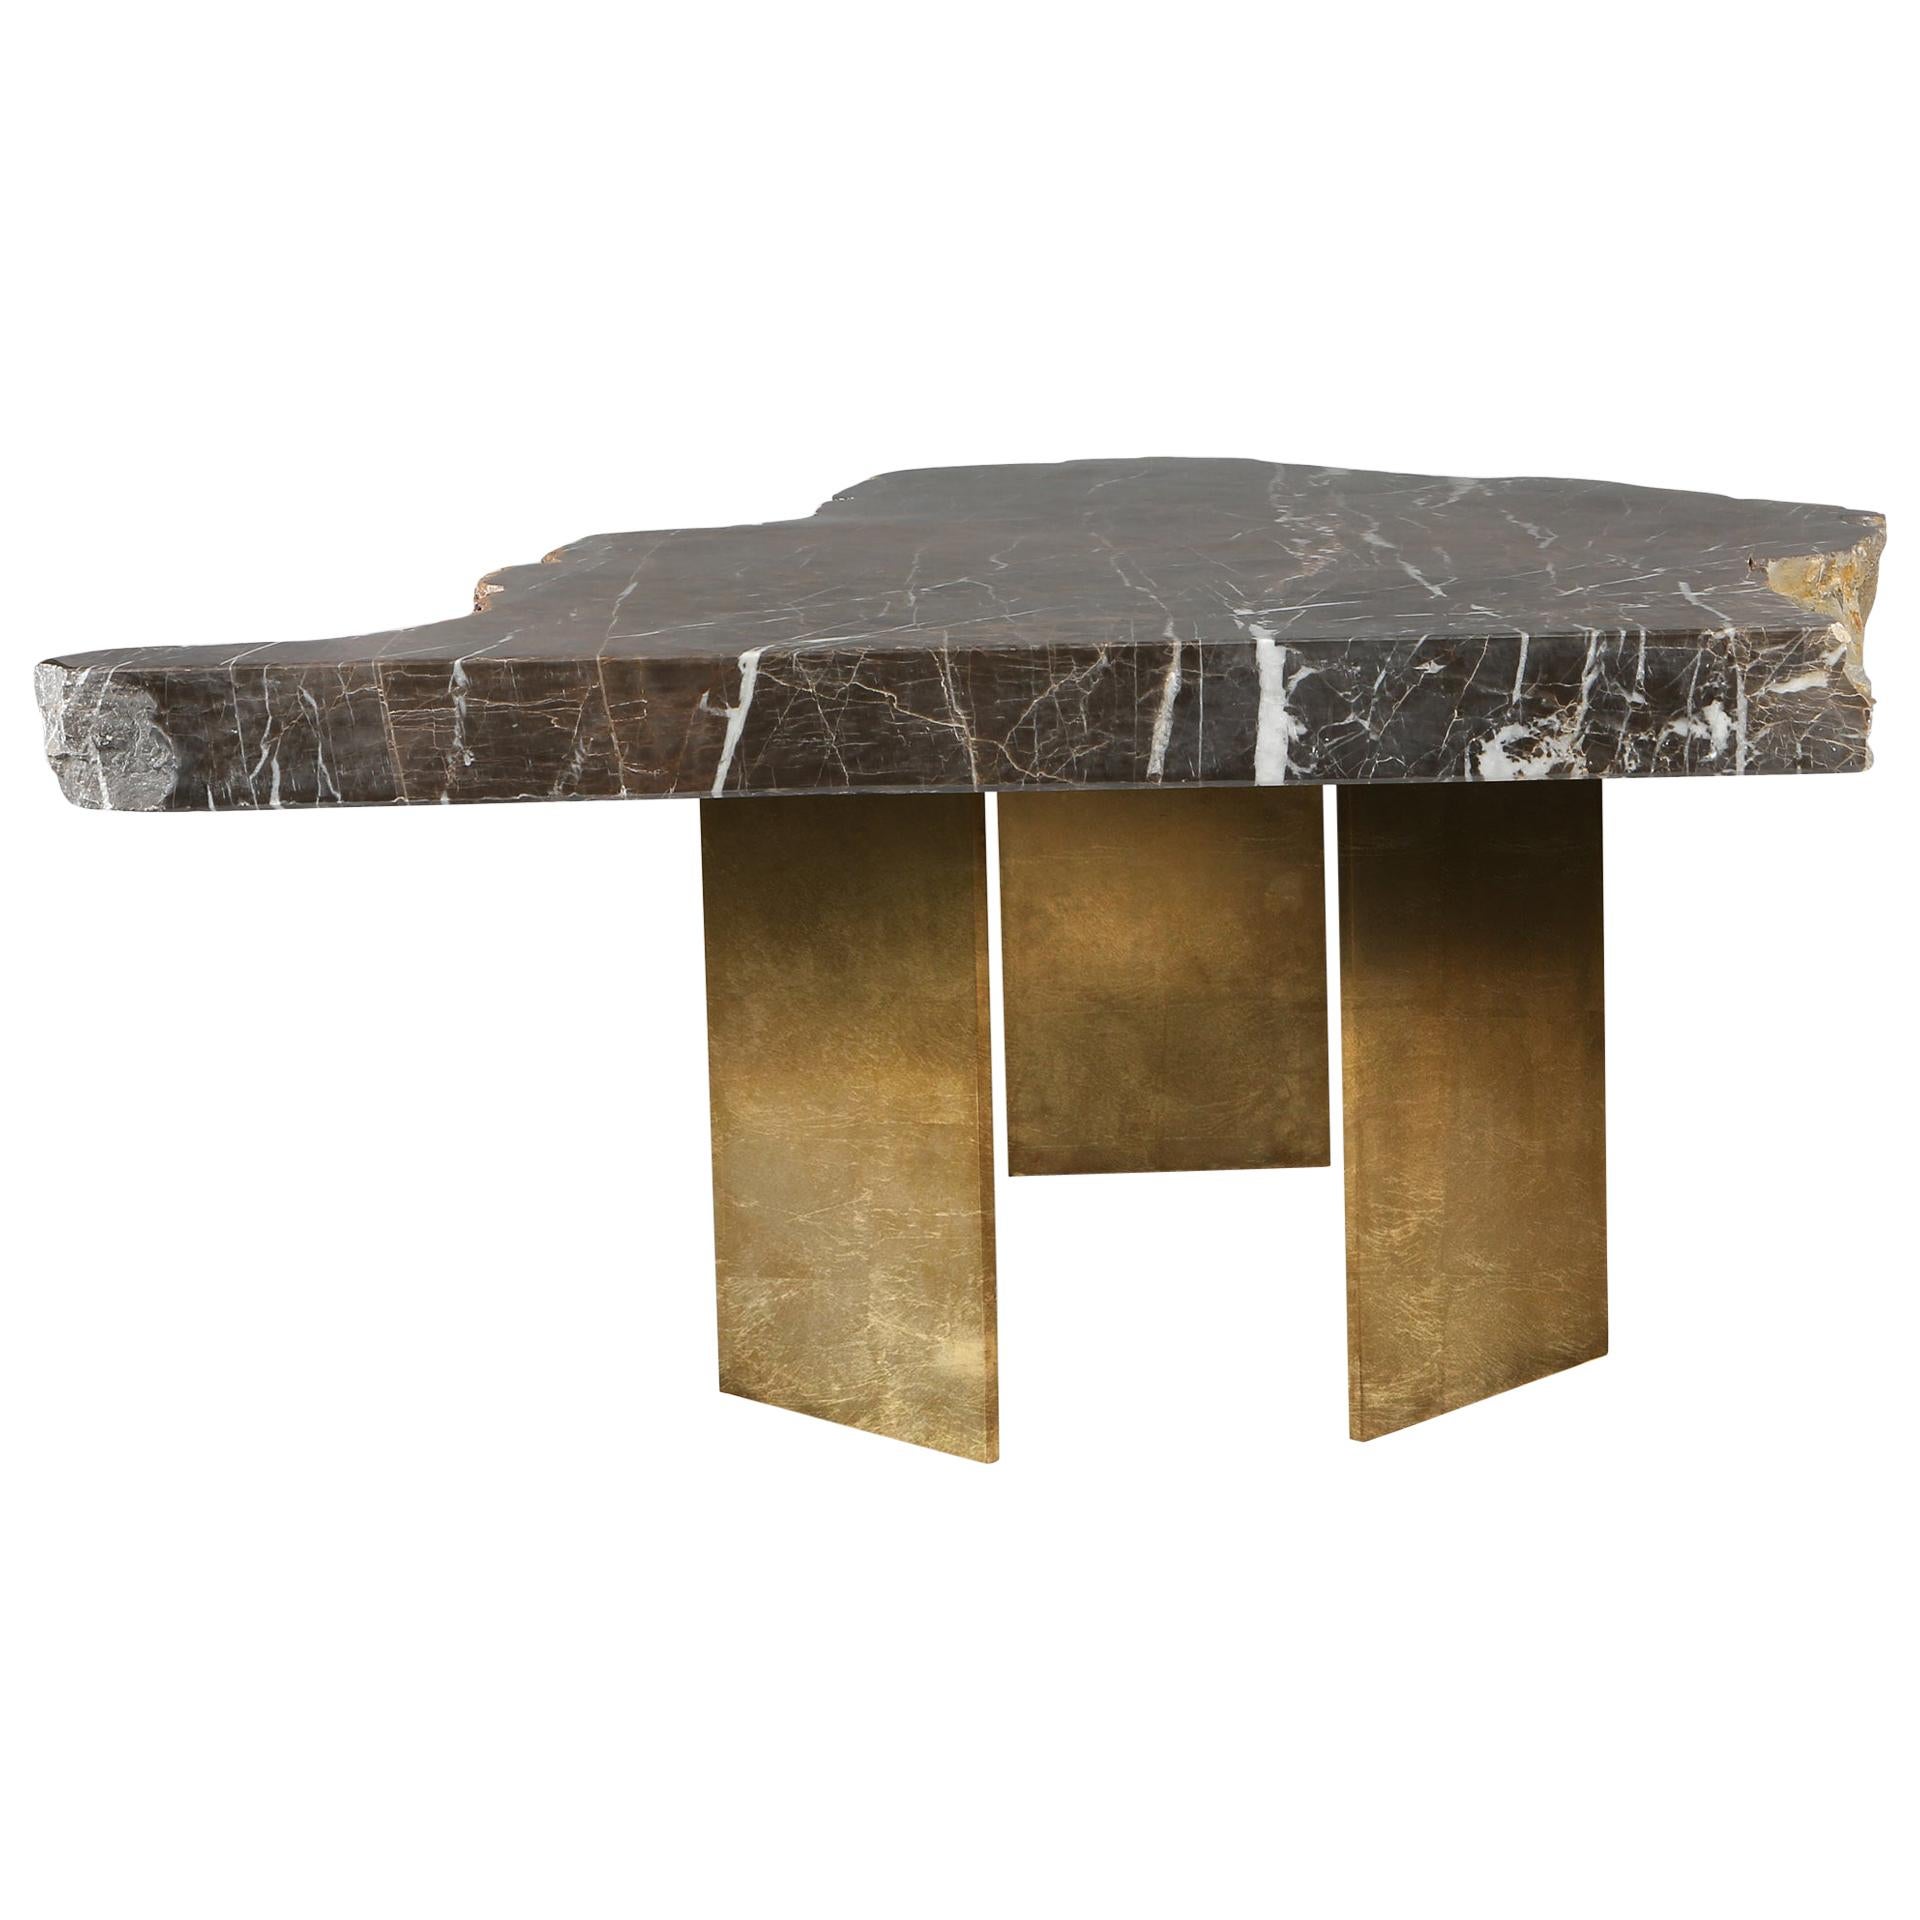 Found Coffee Table in Grey Marble and Steel with Gold Leaf Finish by A Space